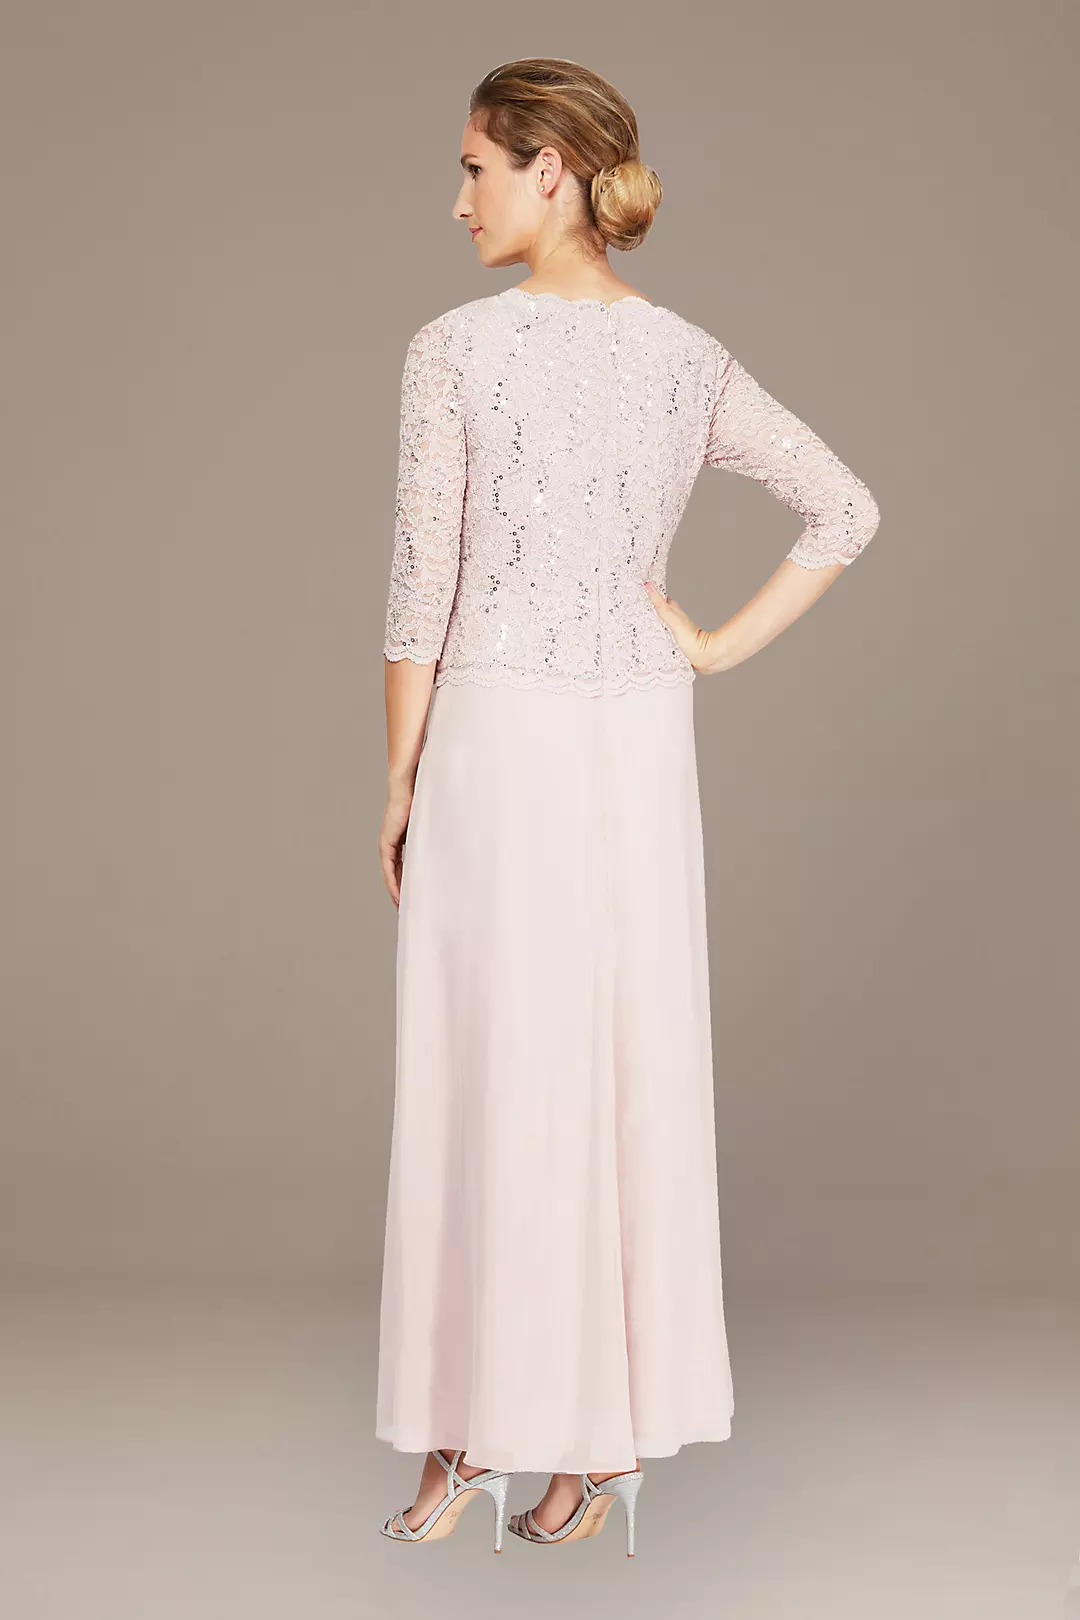 Sequin Lace and Chiffon Mock Two-Piece Gown Image 2